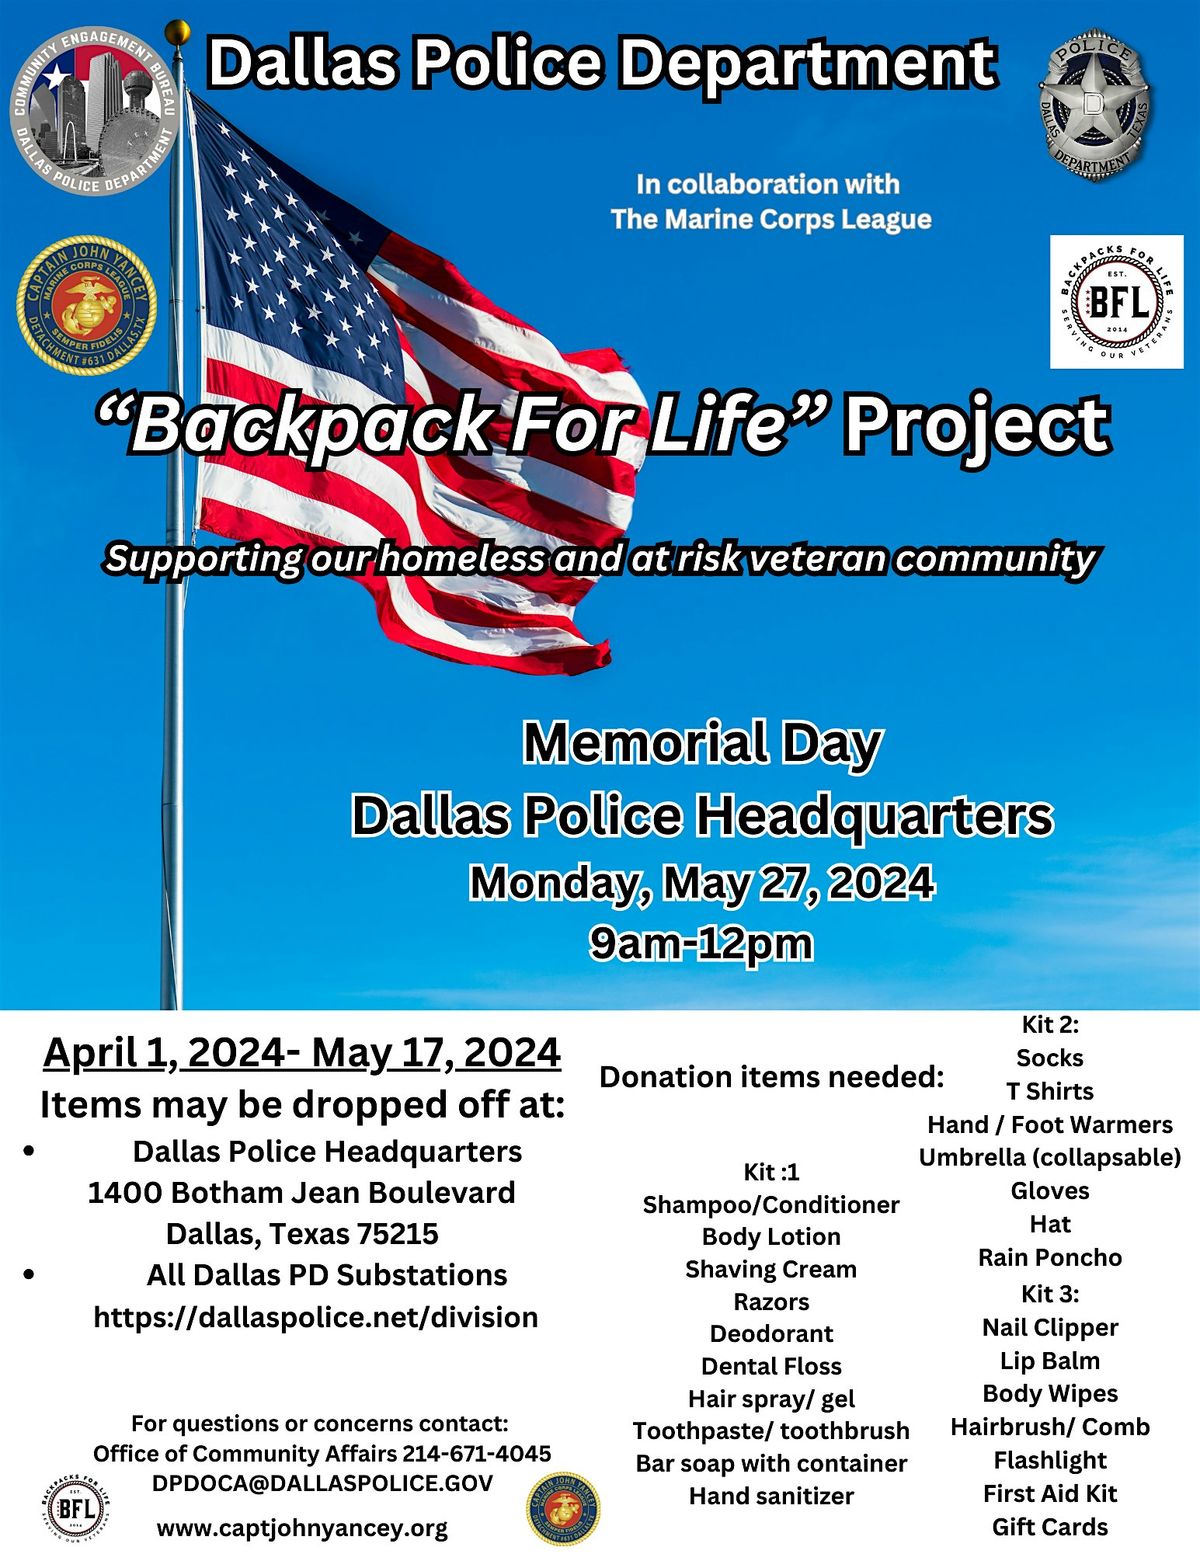 Backpack For Life:  Supporting the Homeless & At-risk Veteran Community